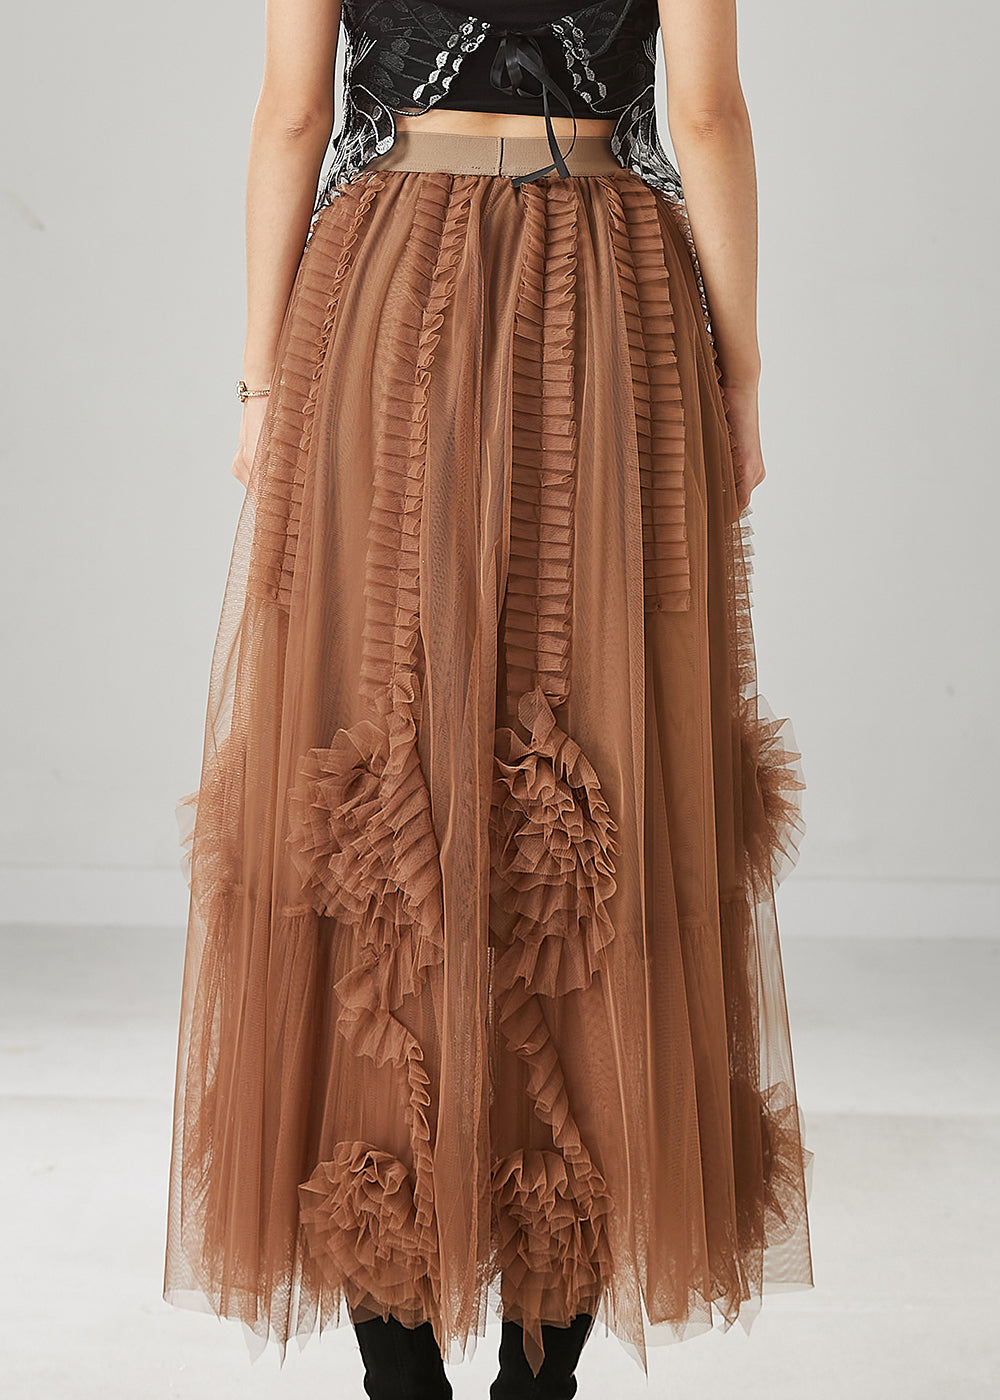 Classy Brown Ruffled Stereoscopic Floral Tulle Skirt Spring